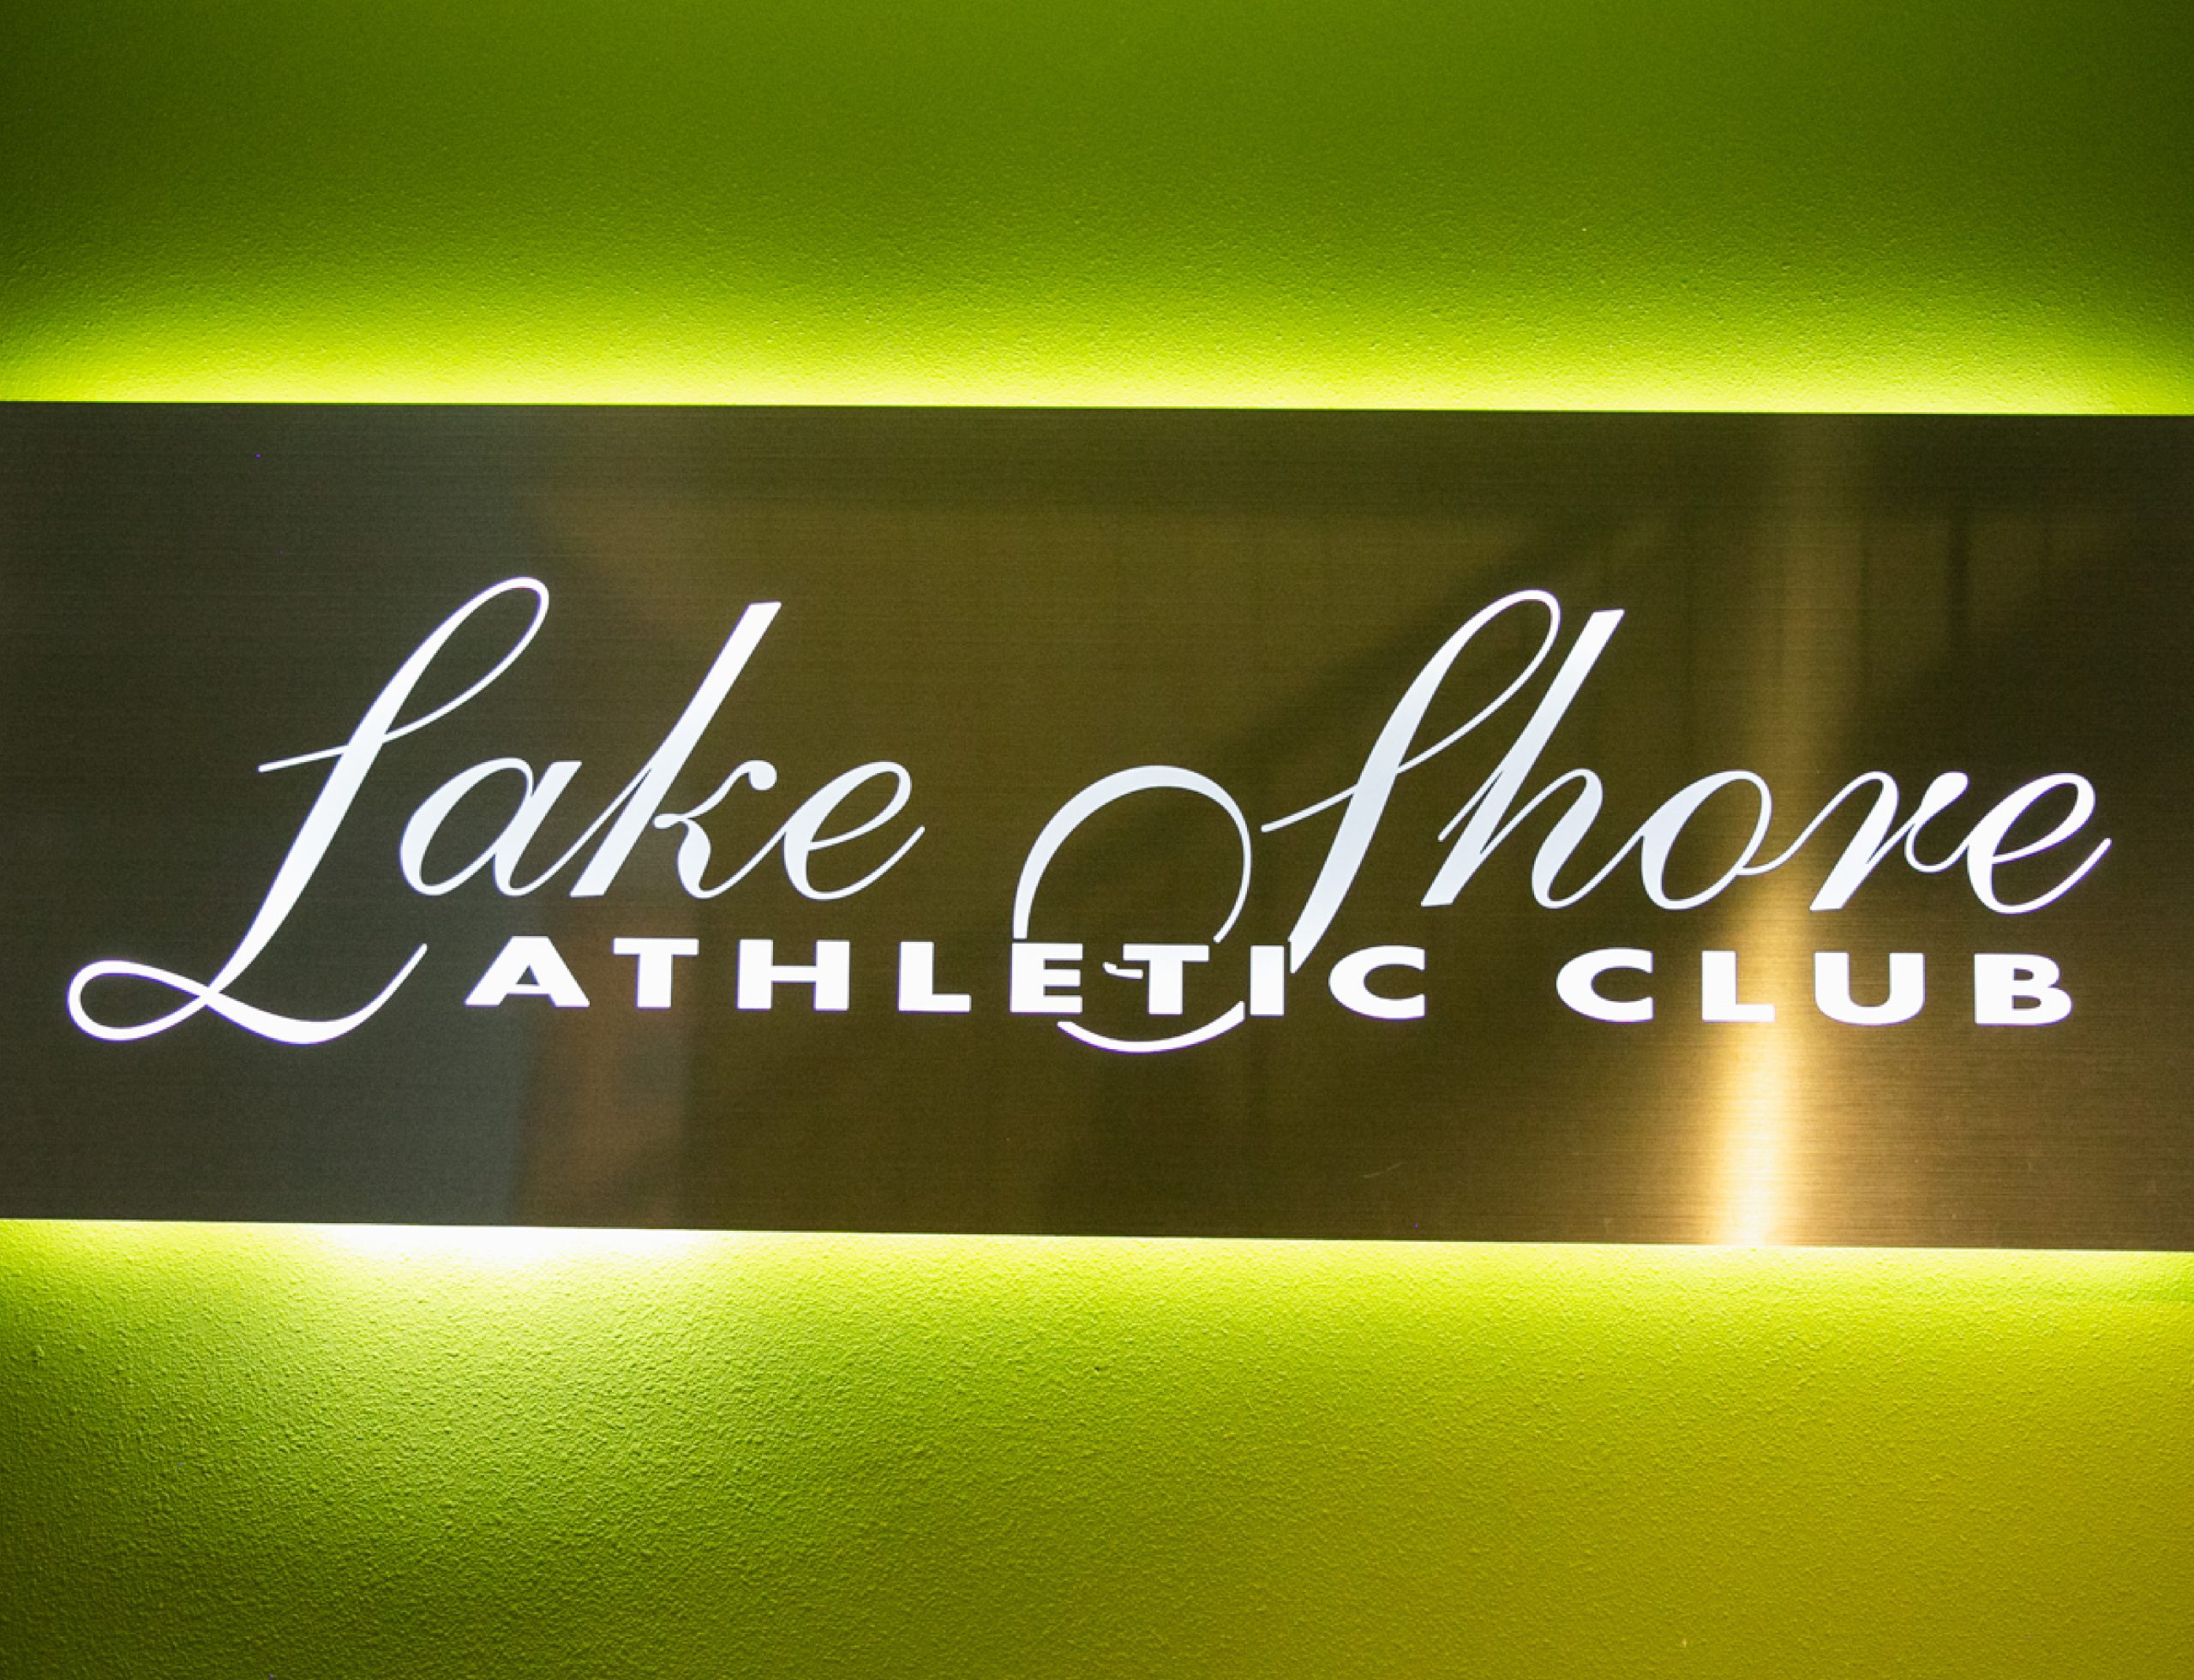 Backlit steel sign with Lake Shore Athletic Club logo, against a lime green painted wall.